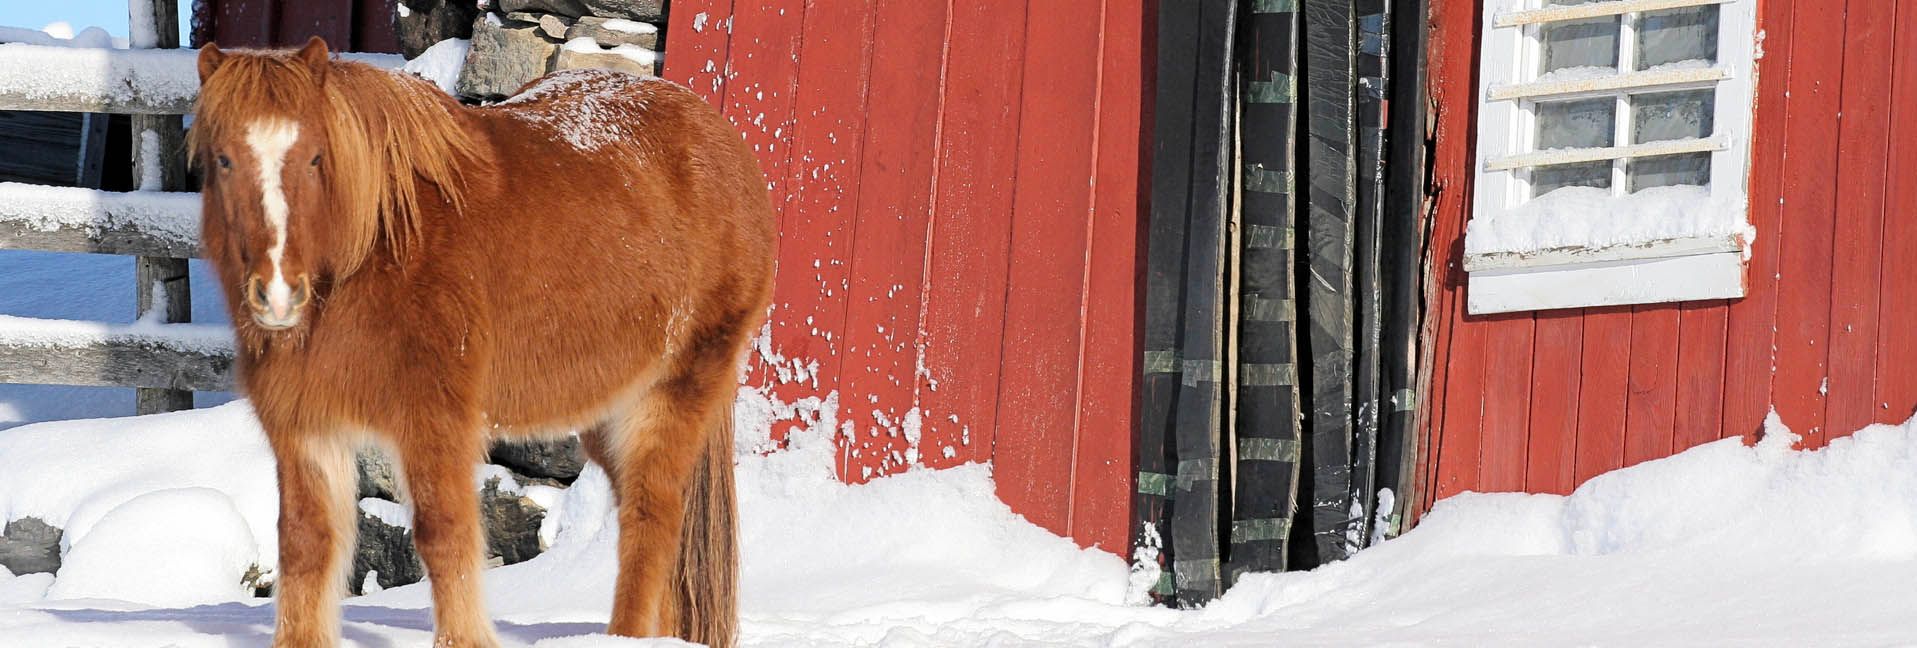 Six Ways to Survive Winter in the Barn